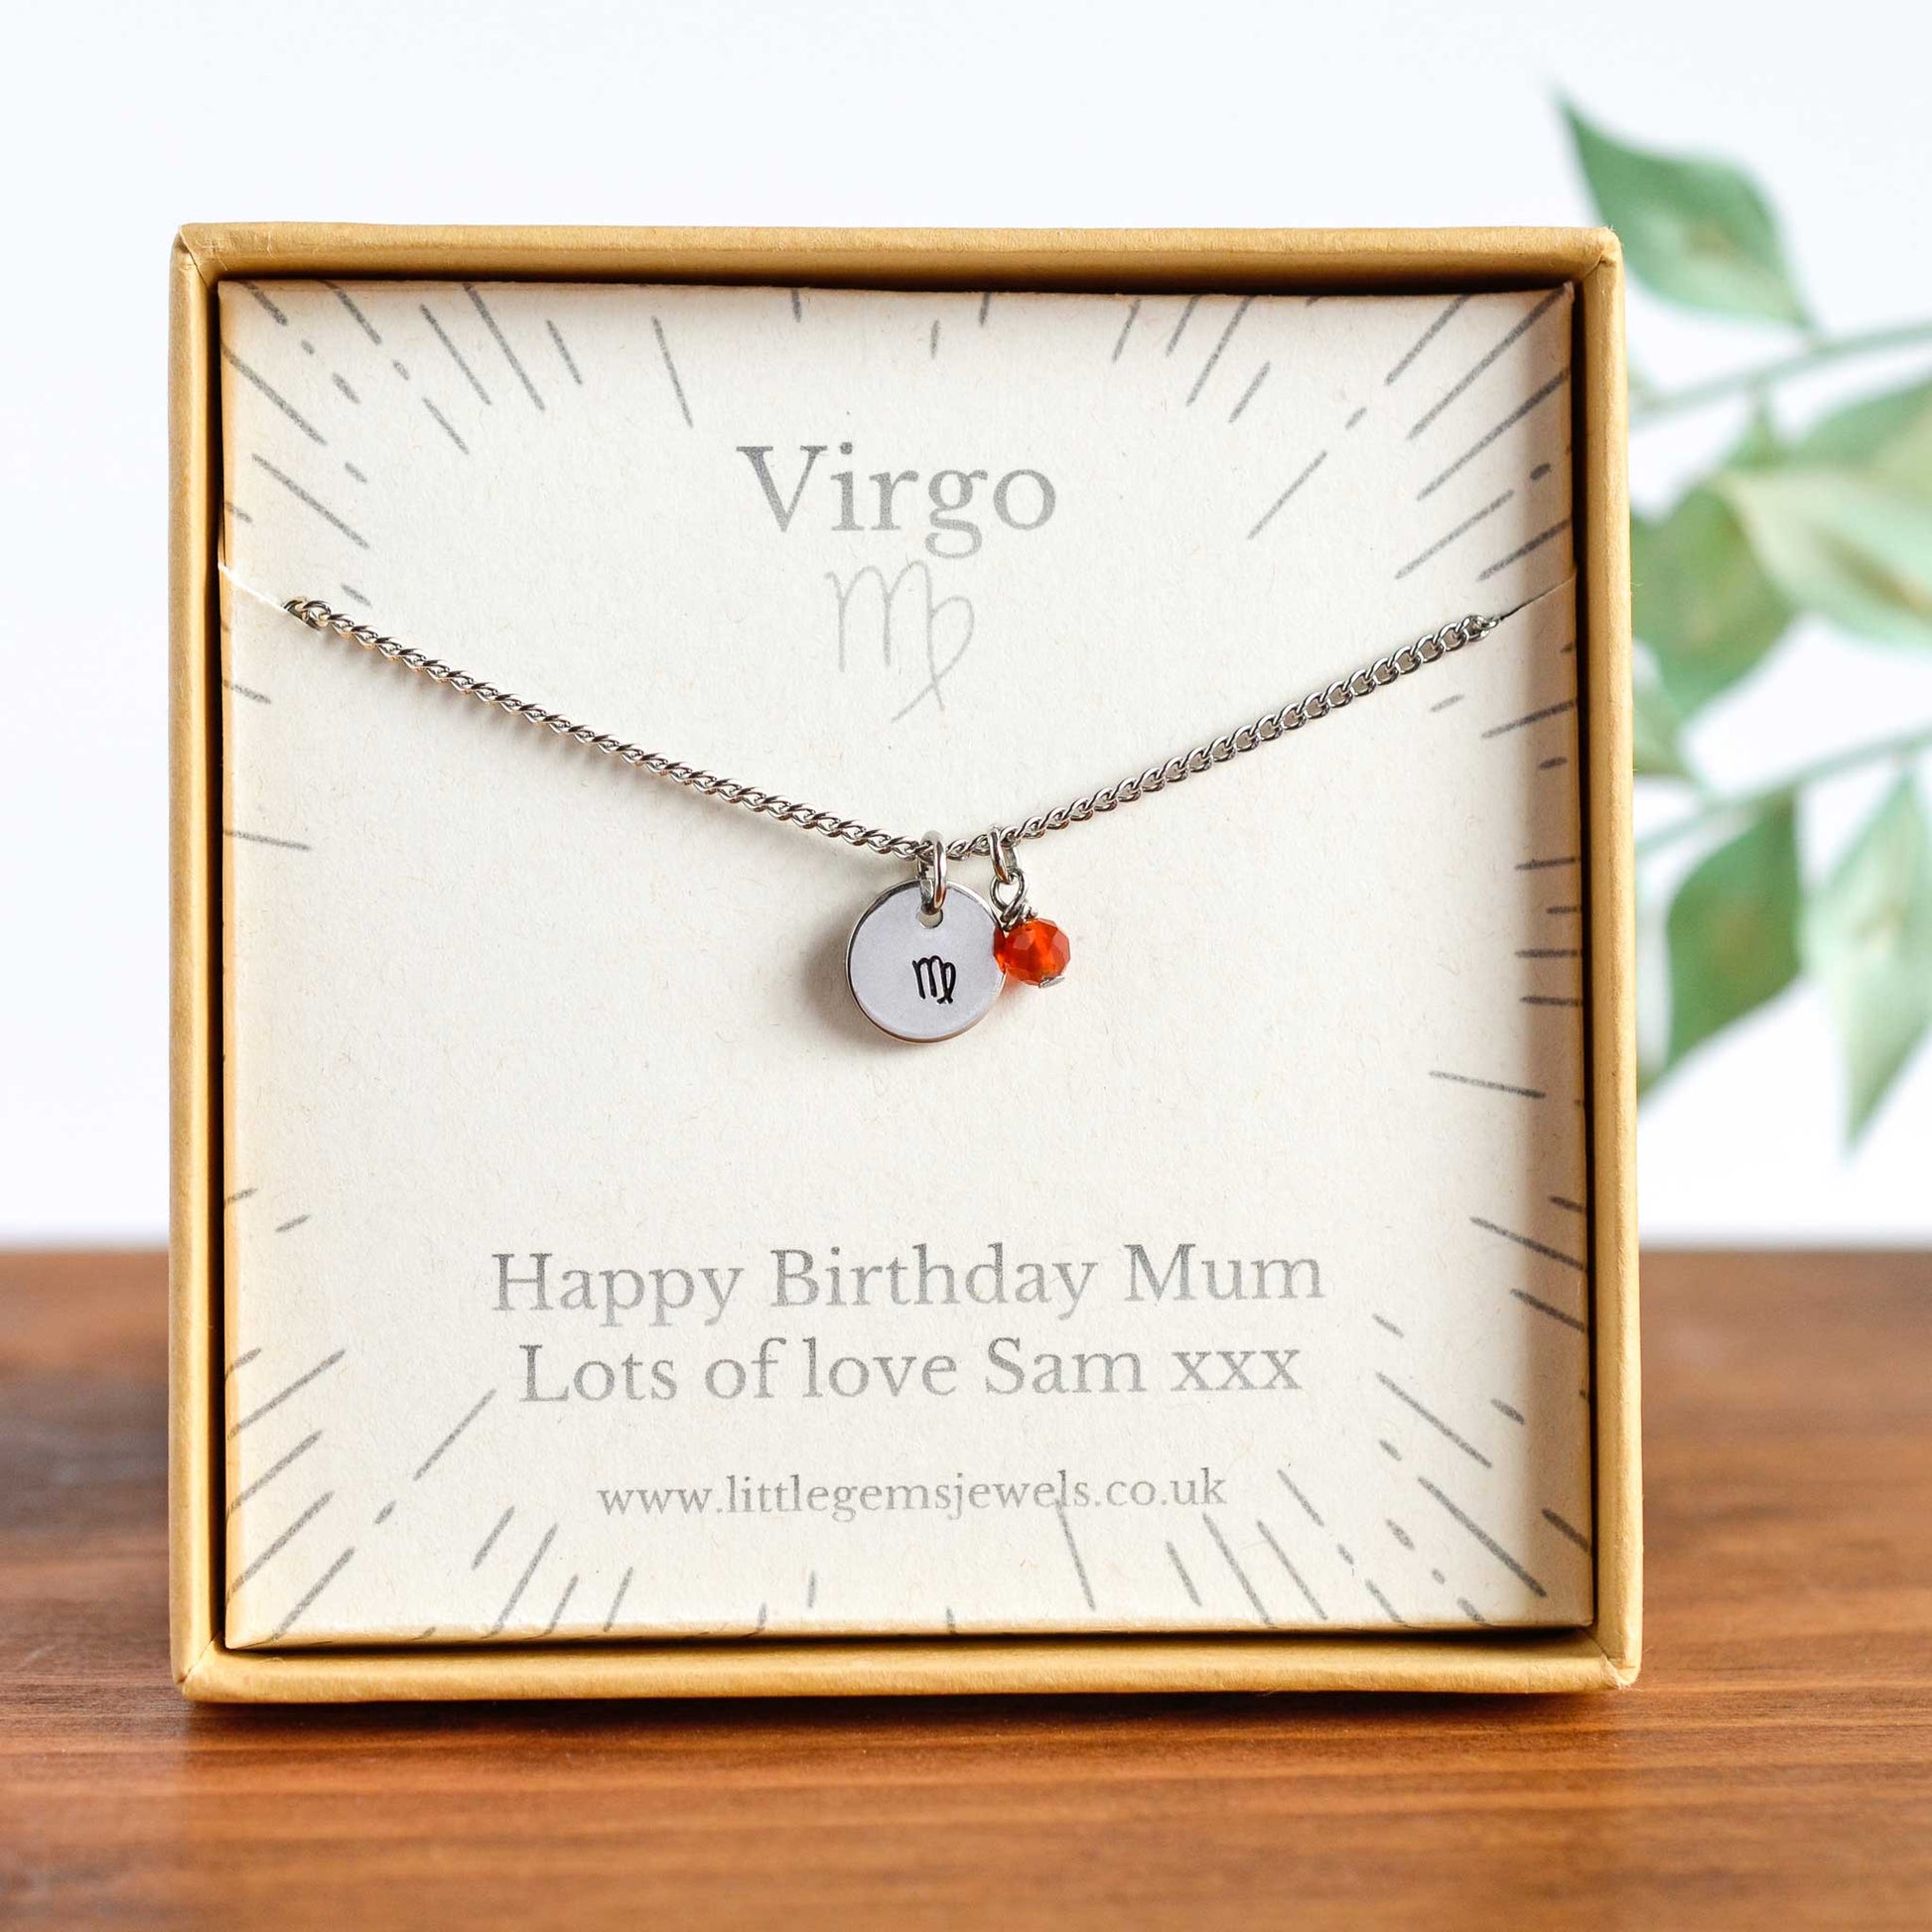 Virgo Zodiac necklace with personalised gift message in eco friendly gift box